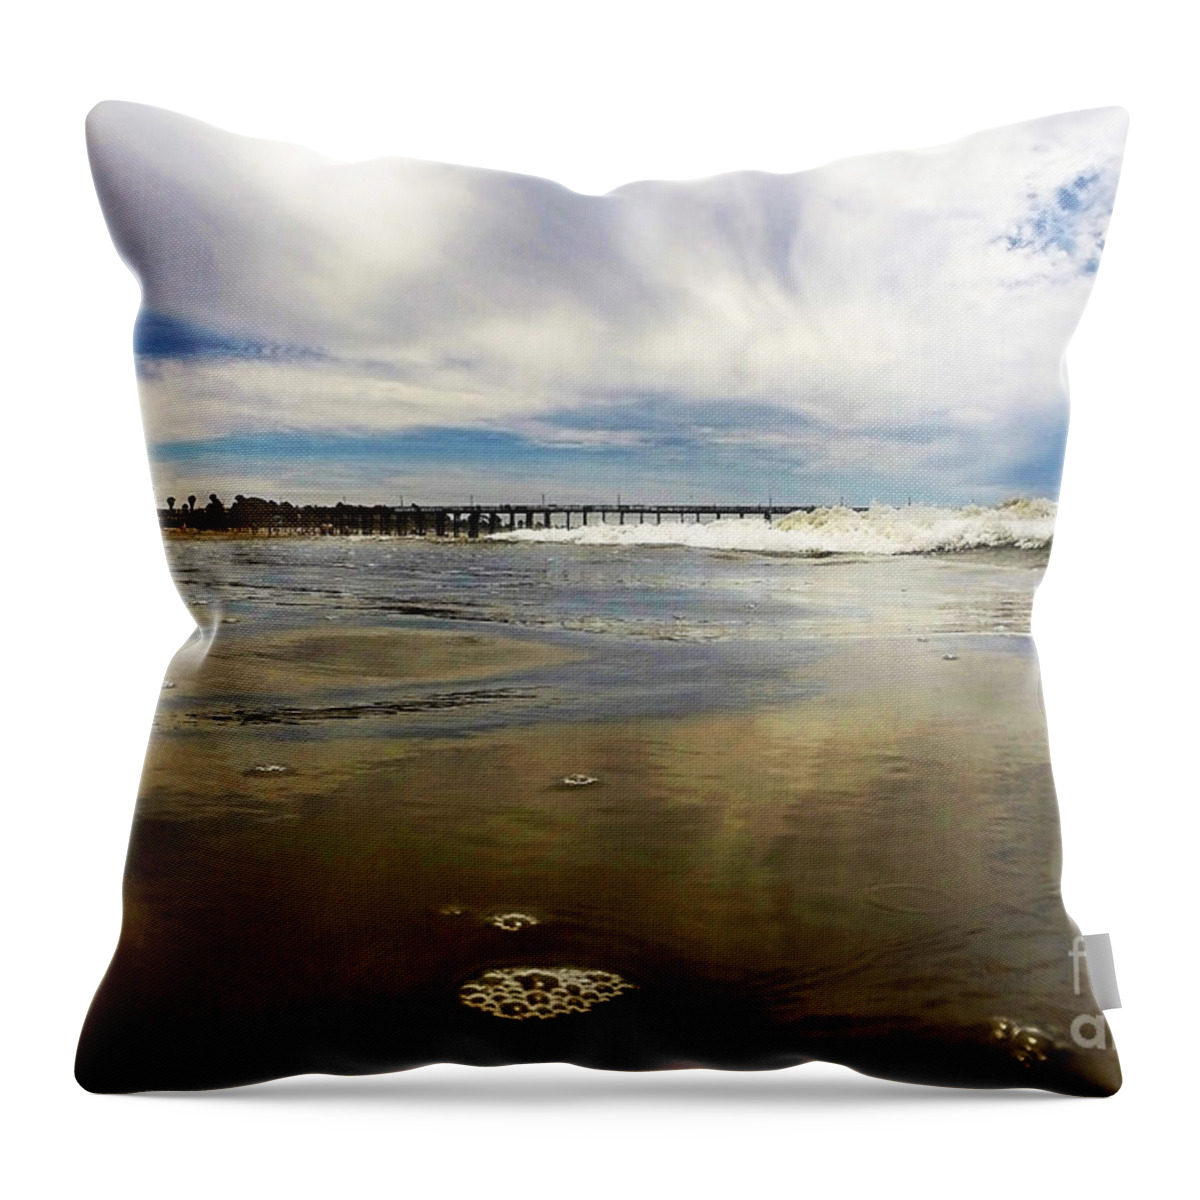  Water Throw Pillow featuring the photograph Shoreline by Dan Holm